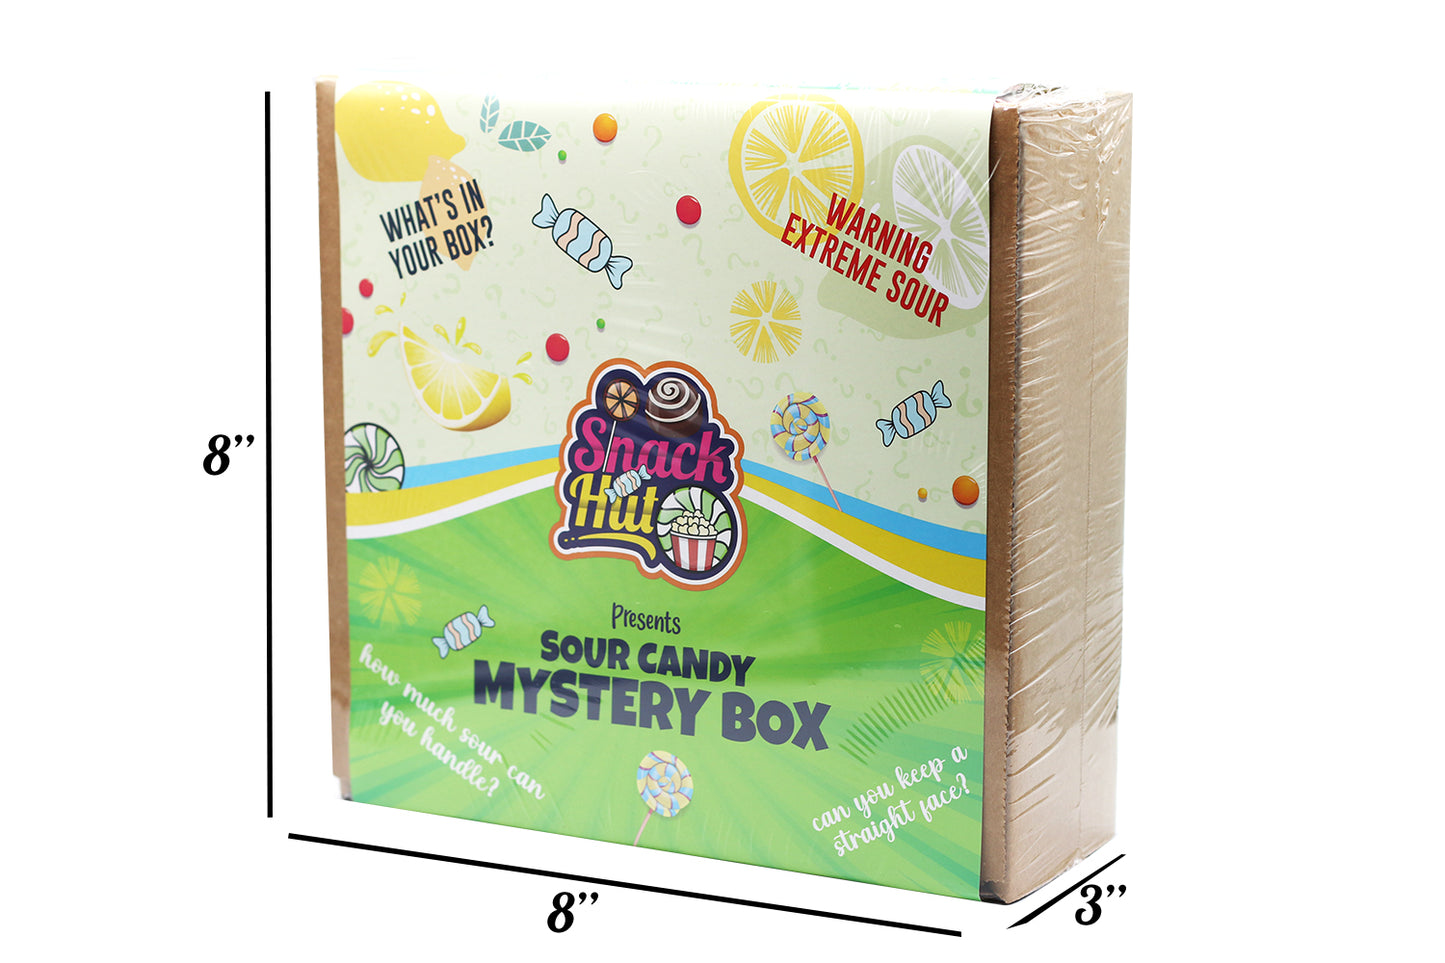 sour candy mystery box measurements